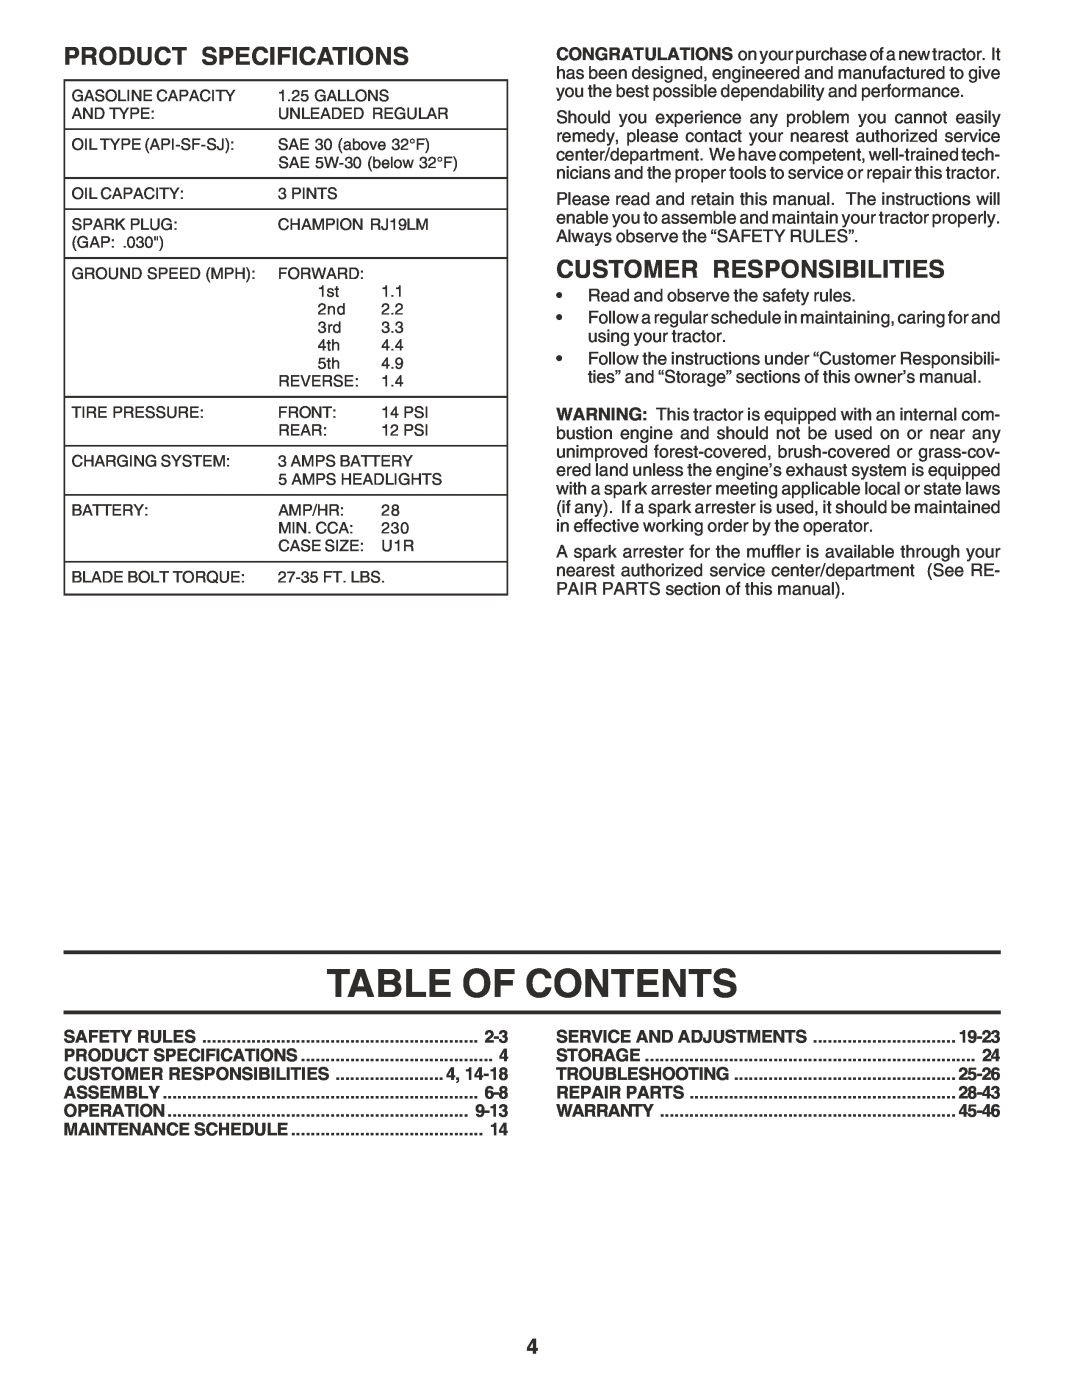 Weed Eater WE1538A manual Table Of Contents, Product Specifications, Customer Responsibilities 